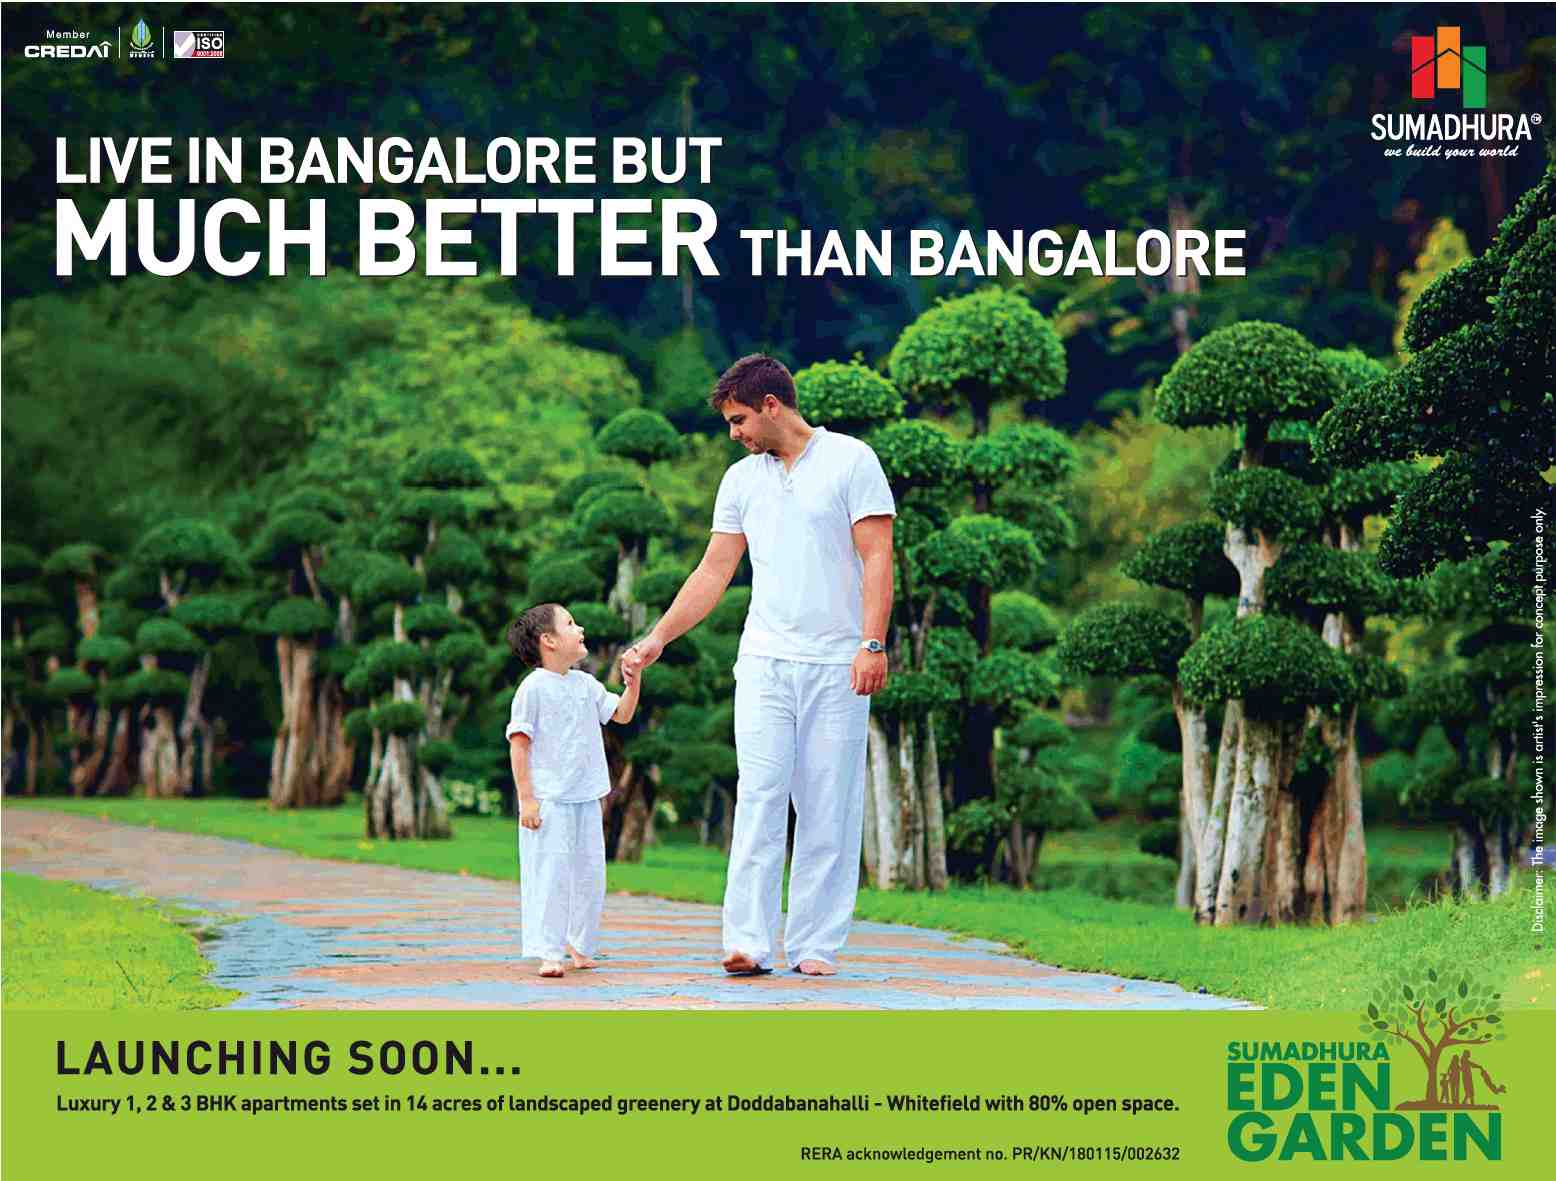 Reside in the homes boast of unmatched quality at Sumadhura Eden Garden in Bangalore Update